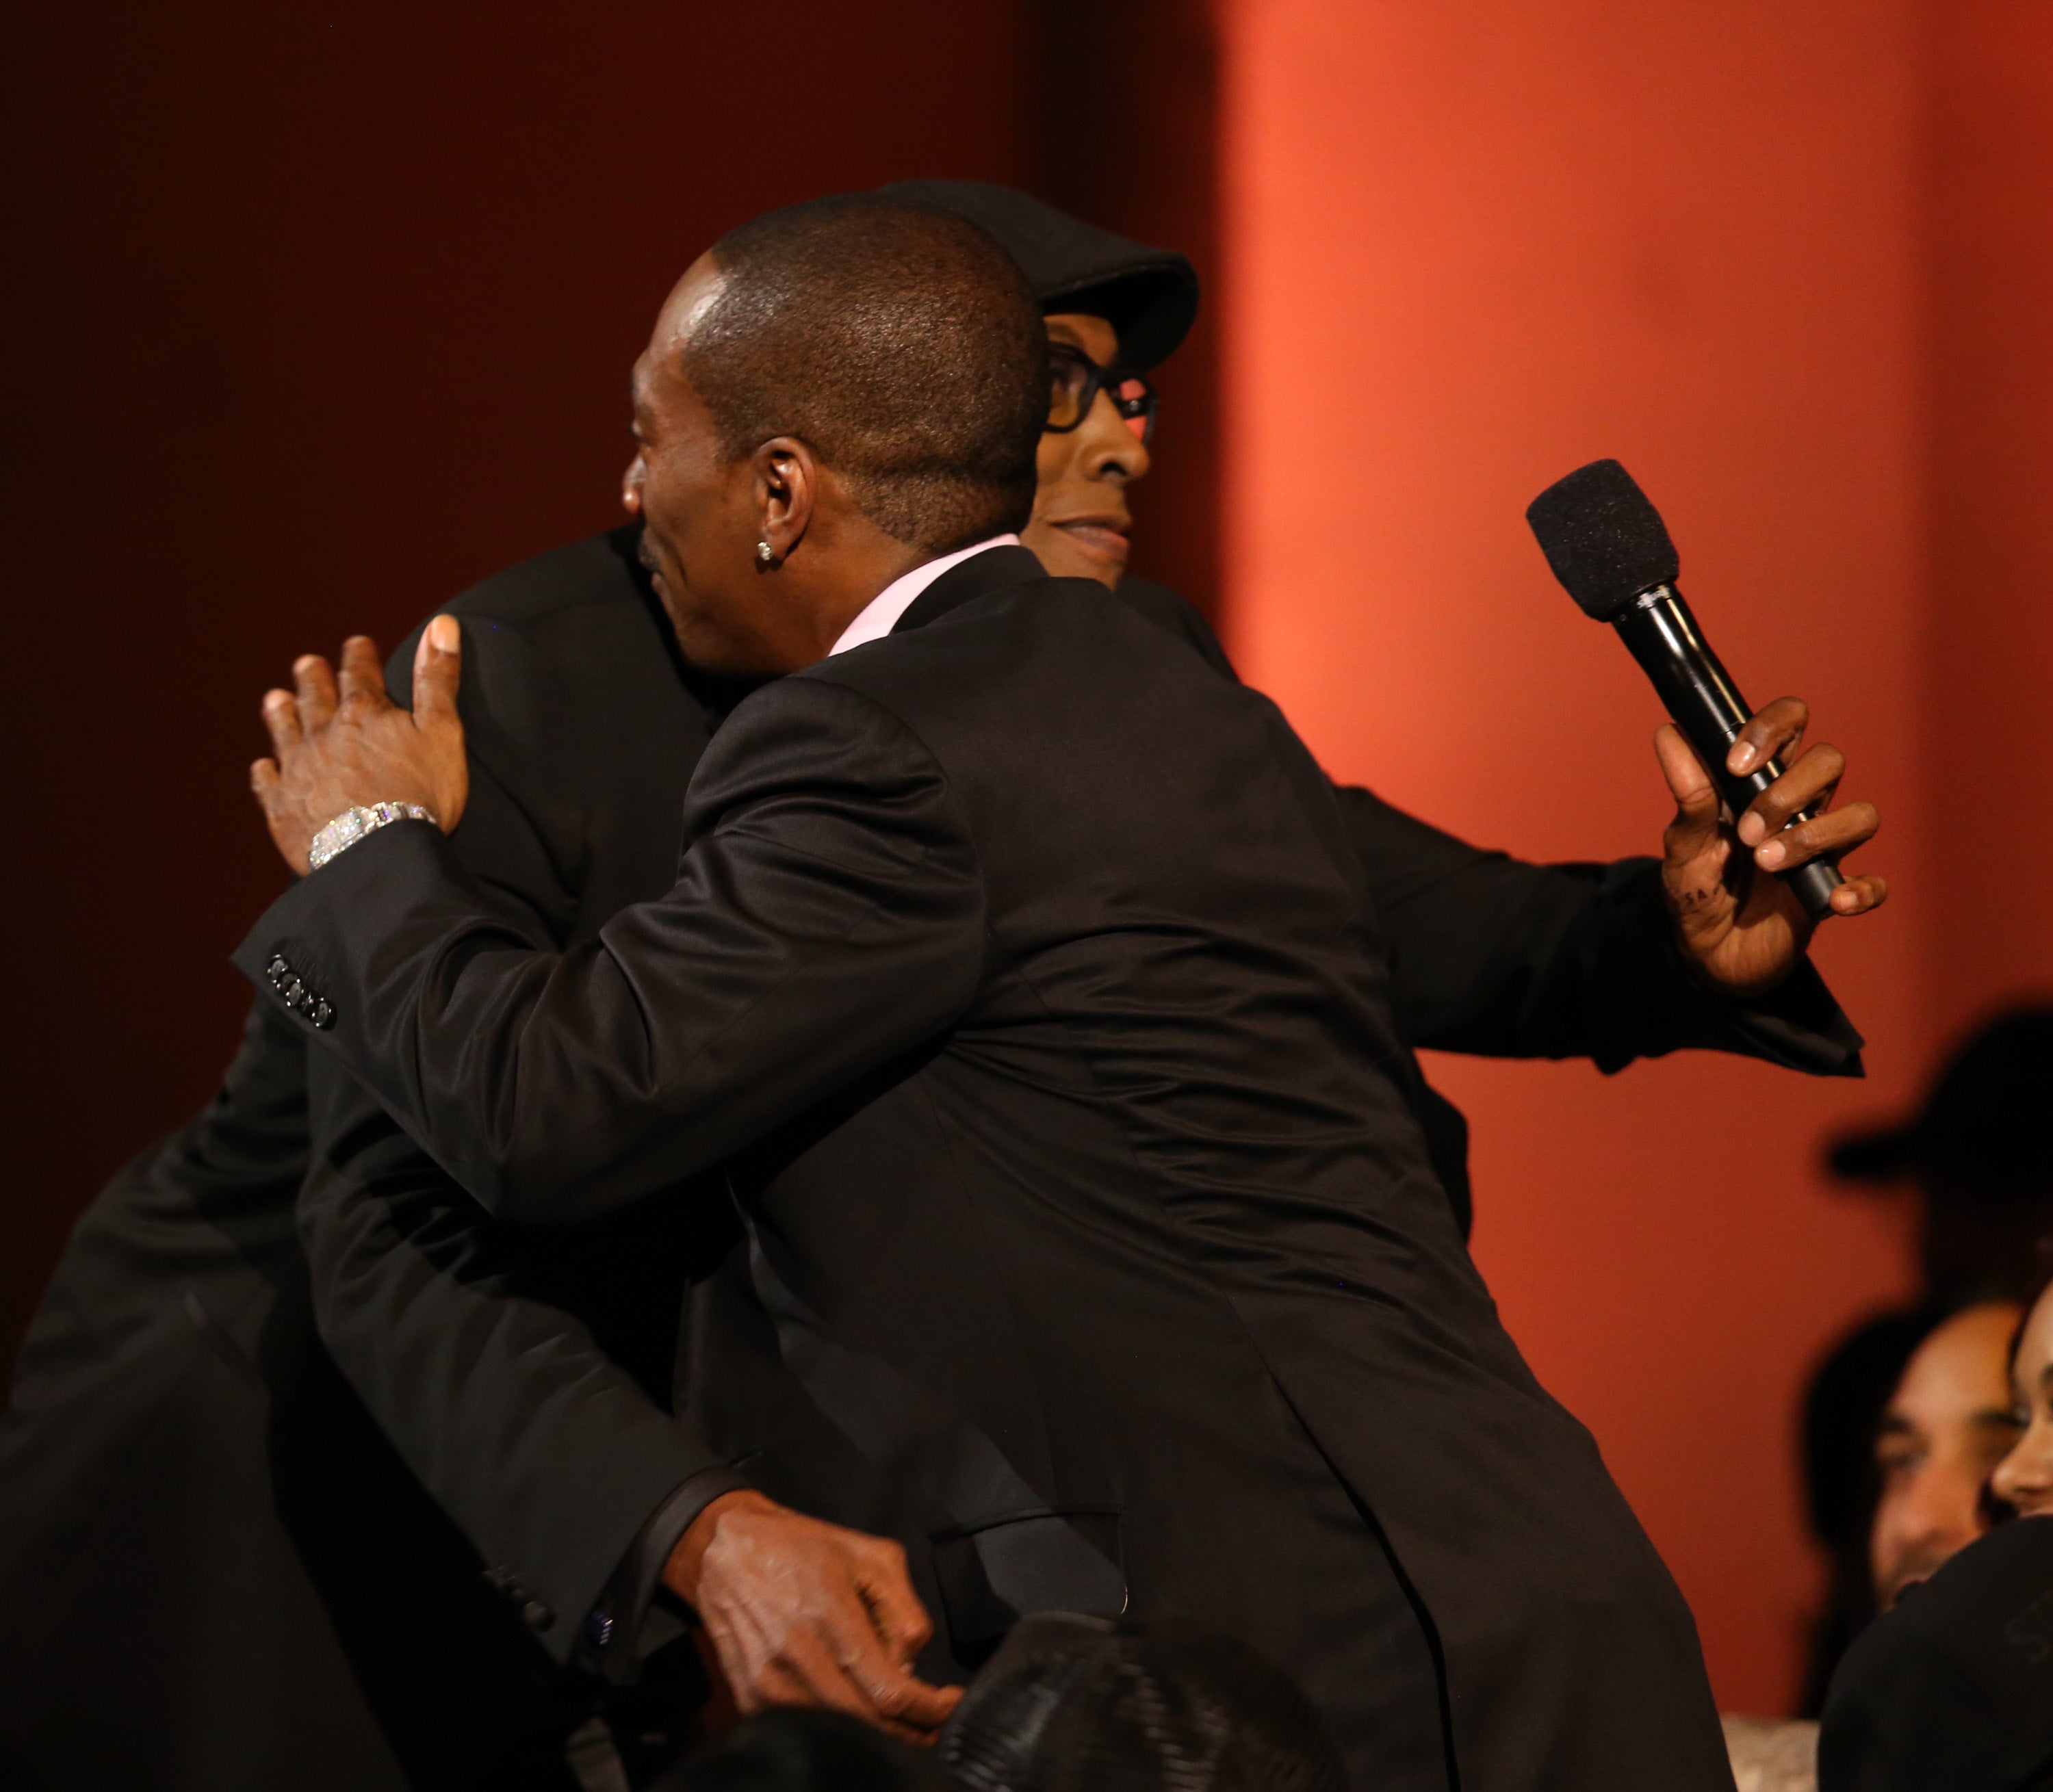 Presenter Hall and honoree Murphy onstage at ‘Eddie Murphy: One Night Only’ at the Saban Theatre on 3 November 2012